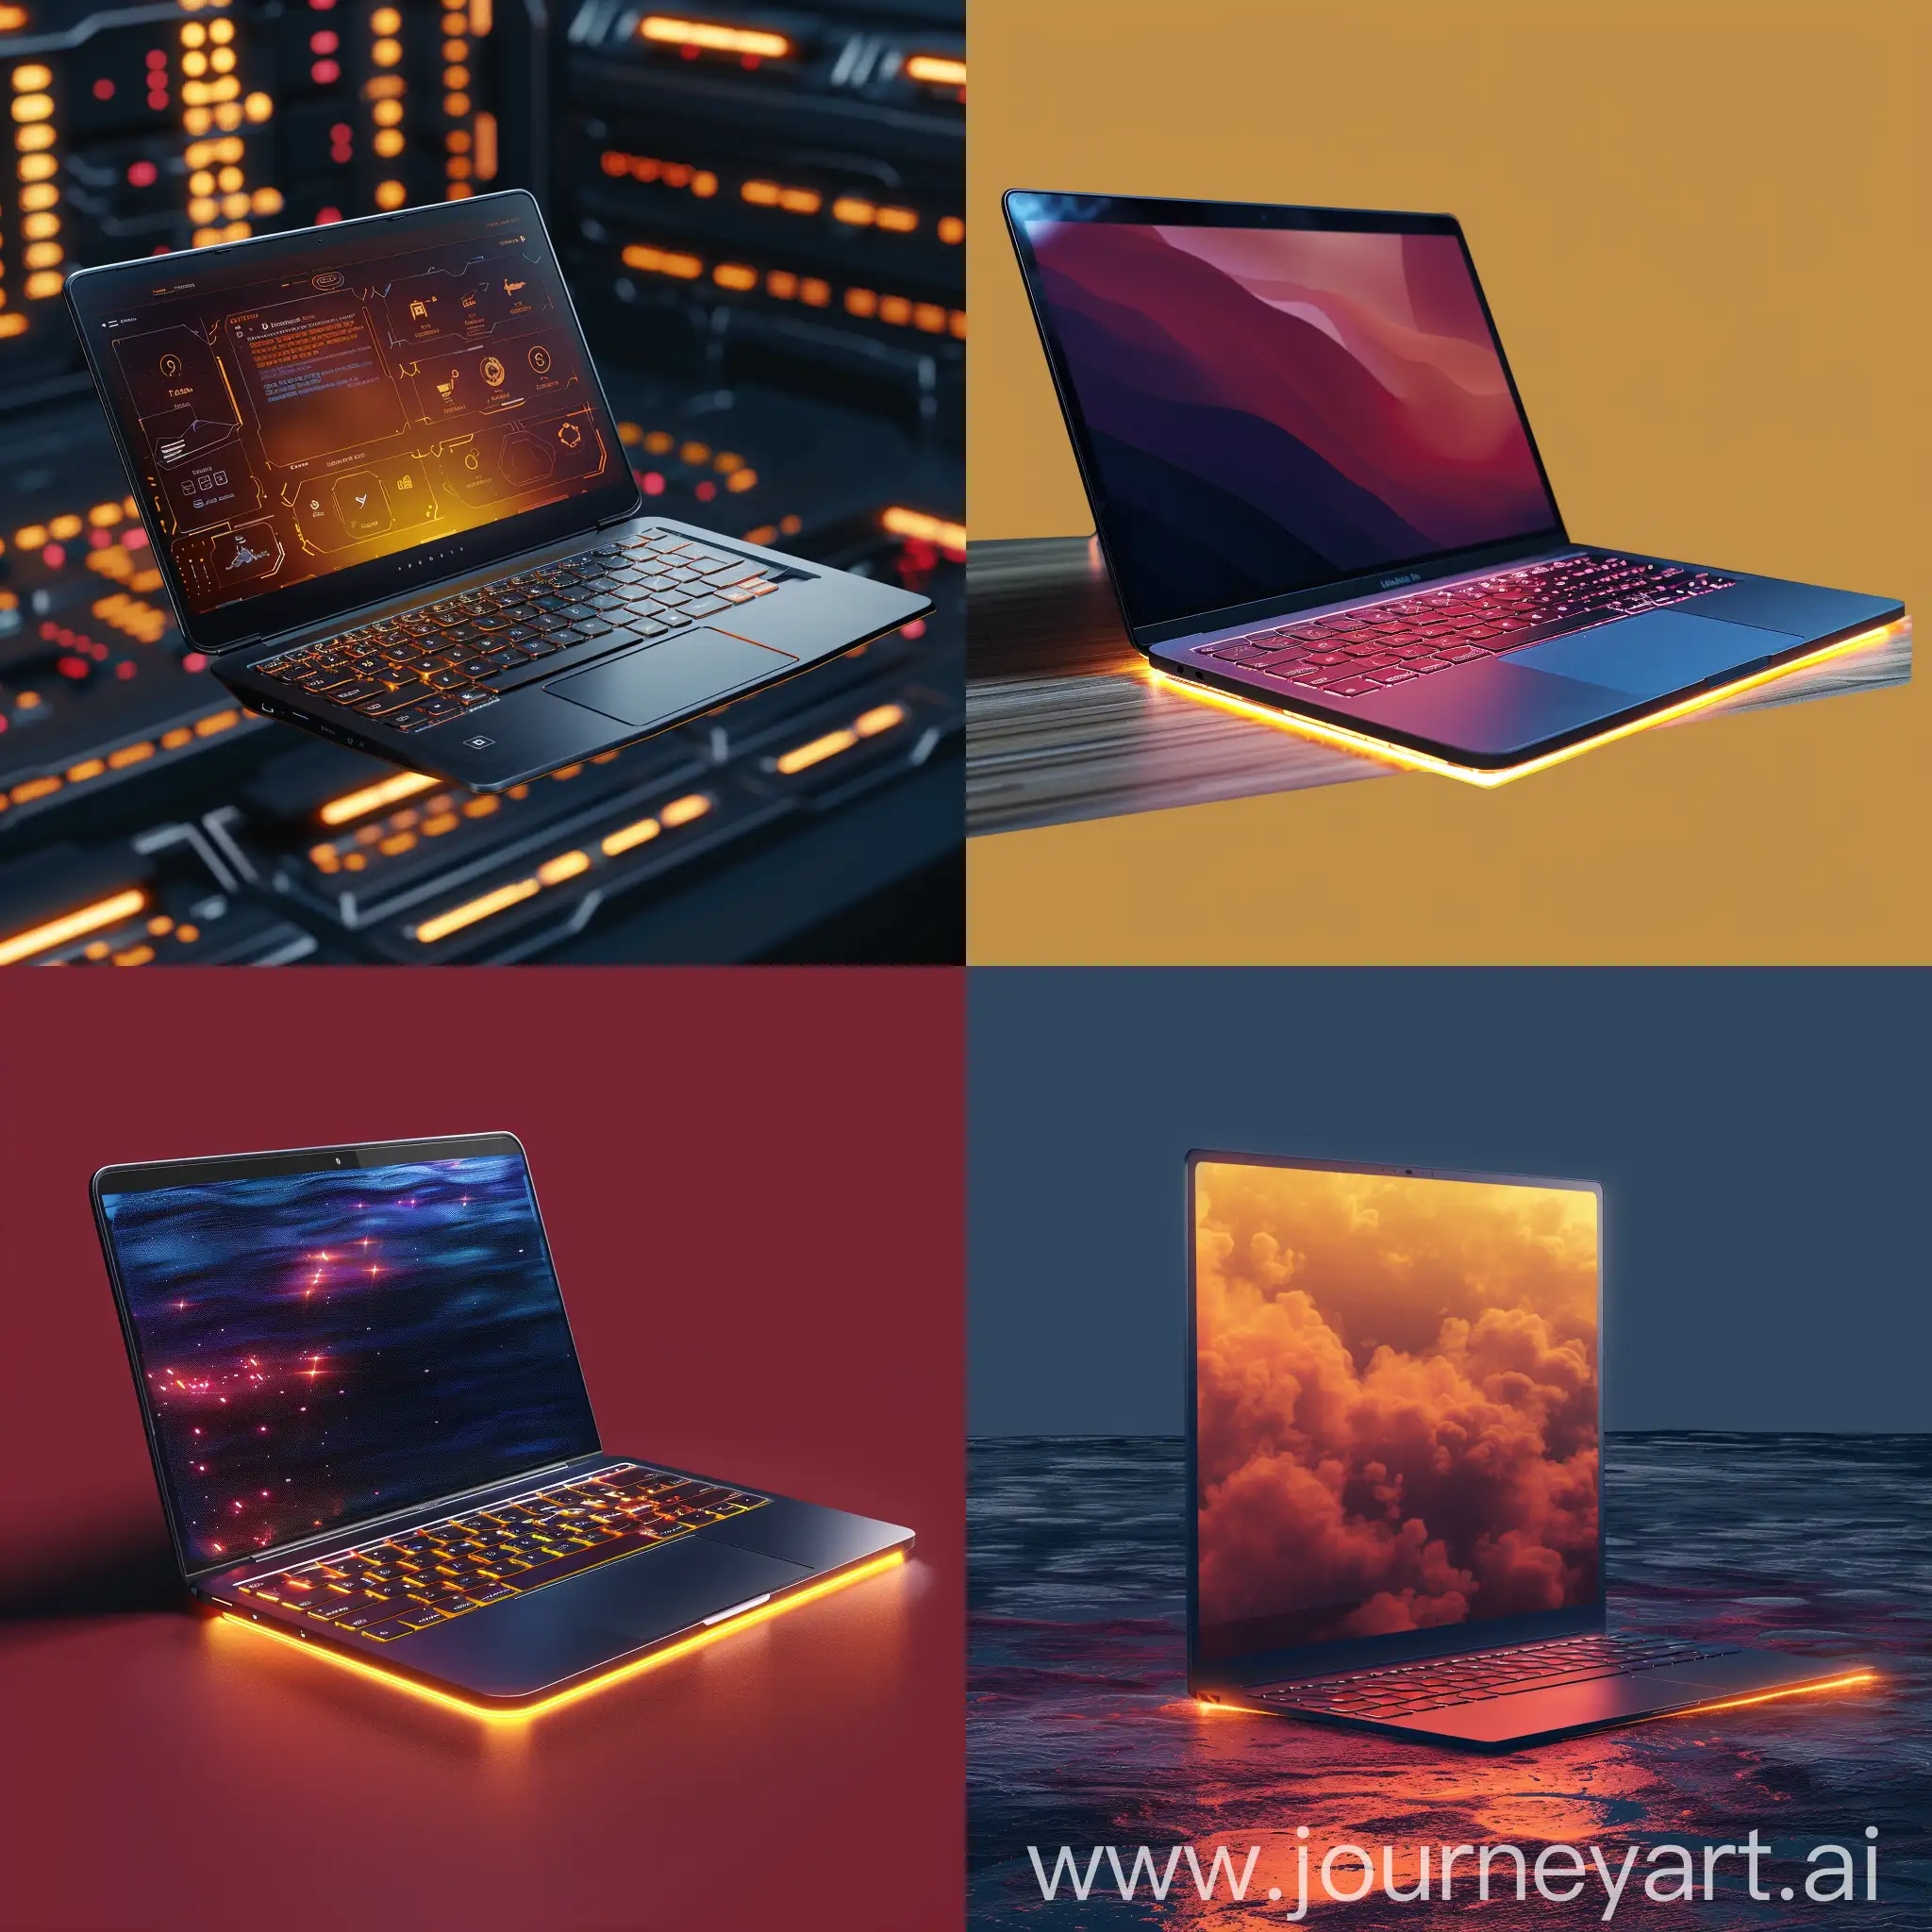 Futuristic:: laptop https://media.wired.com/photos/64daad6b4a854832b16fd3bc/master/pass/How-to-Choose-a-Laptop-August-2023-Gear.jpg, Transparent display, Holographic projection, Flexible and foldable design, Augmented reality interface, Biometric security, Self-healing materials, Wireless charging, Voice and gesture control, AI integration, Eco-friendly material, Thin and lightweight design, Edge-to-edge display, High-resolution display, Backlit keyboard, USB-C connectivity, Solid-state drive (SSD), Touchscreen functionality, Long battery life, Multiple connectivity options, Enhanced security features, octane render --stylize 1000